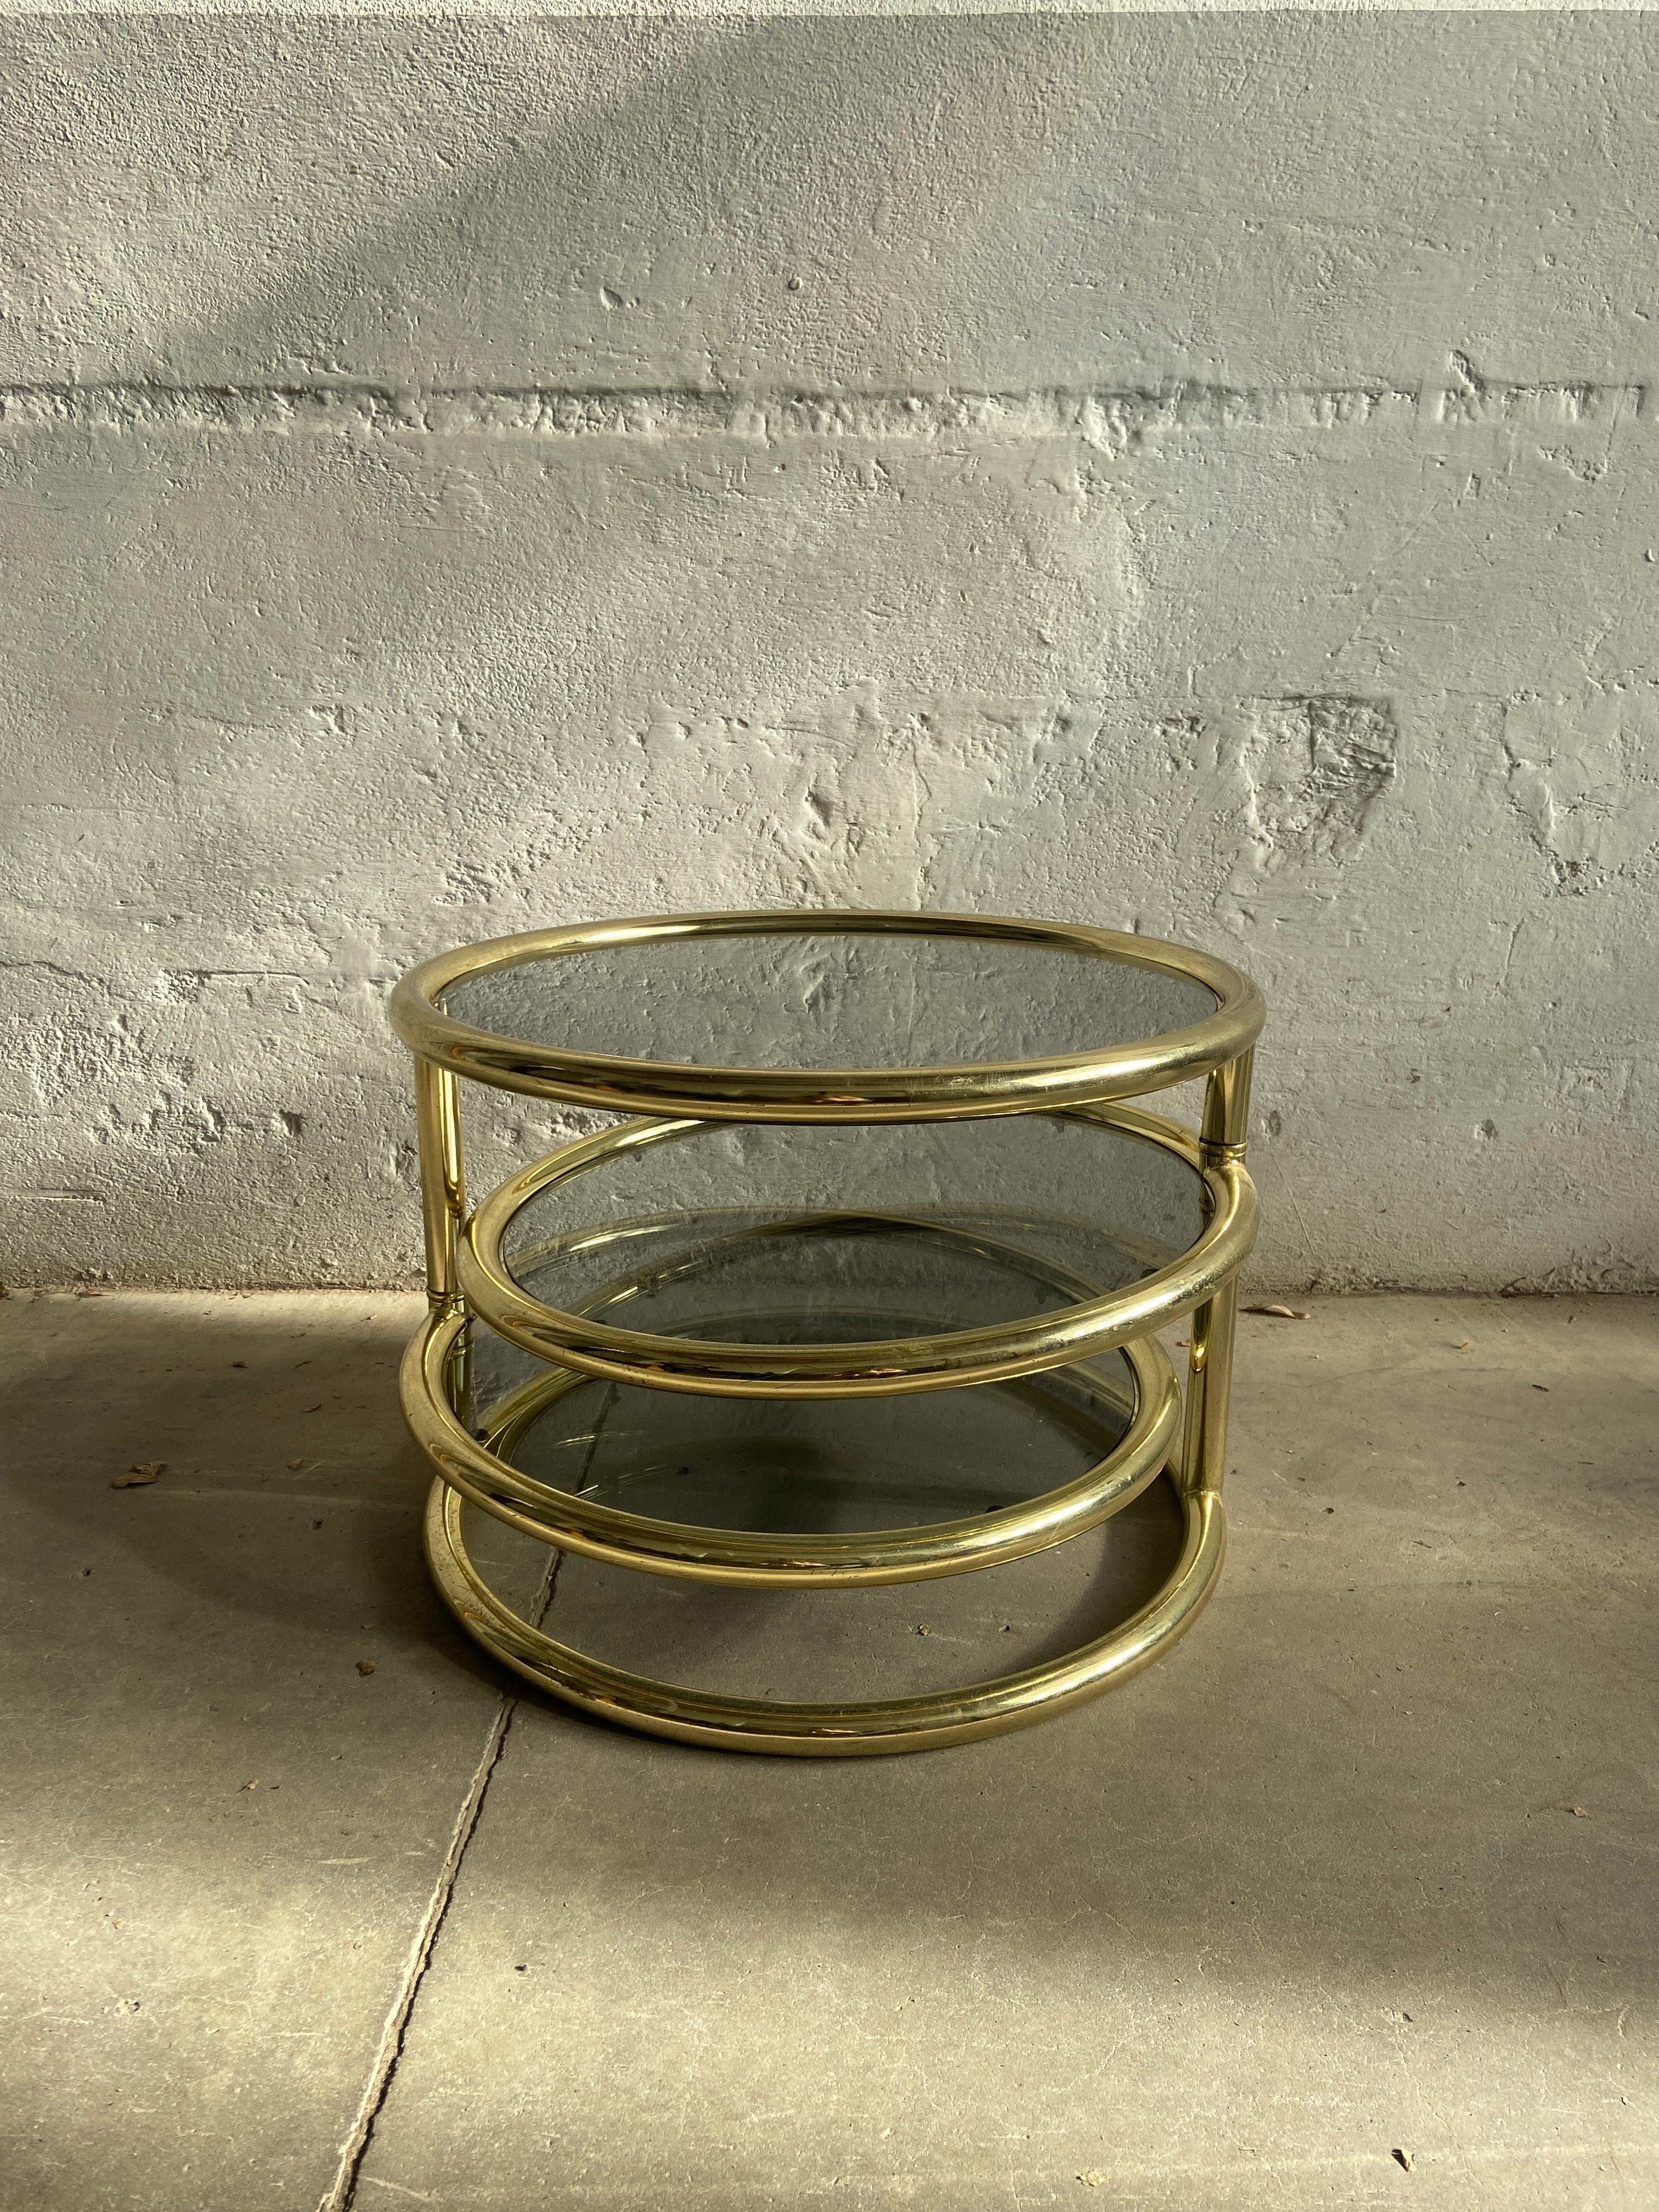 Mid-Century Modern Italian sofa or coffee table with three round smoked glass surfaced platforms mounted in Gilt Metal rings.
The adjustable two smaller rings allow you to place the table into various positions.
The table is in really good vintage